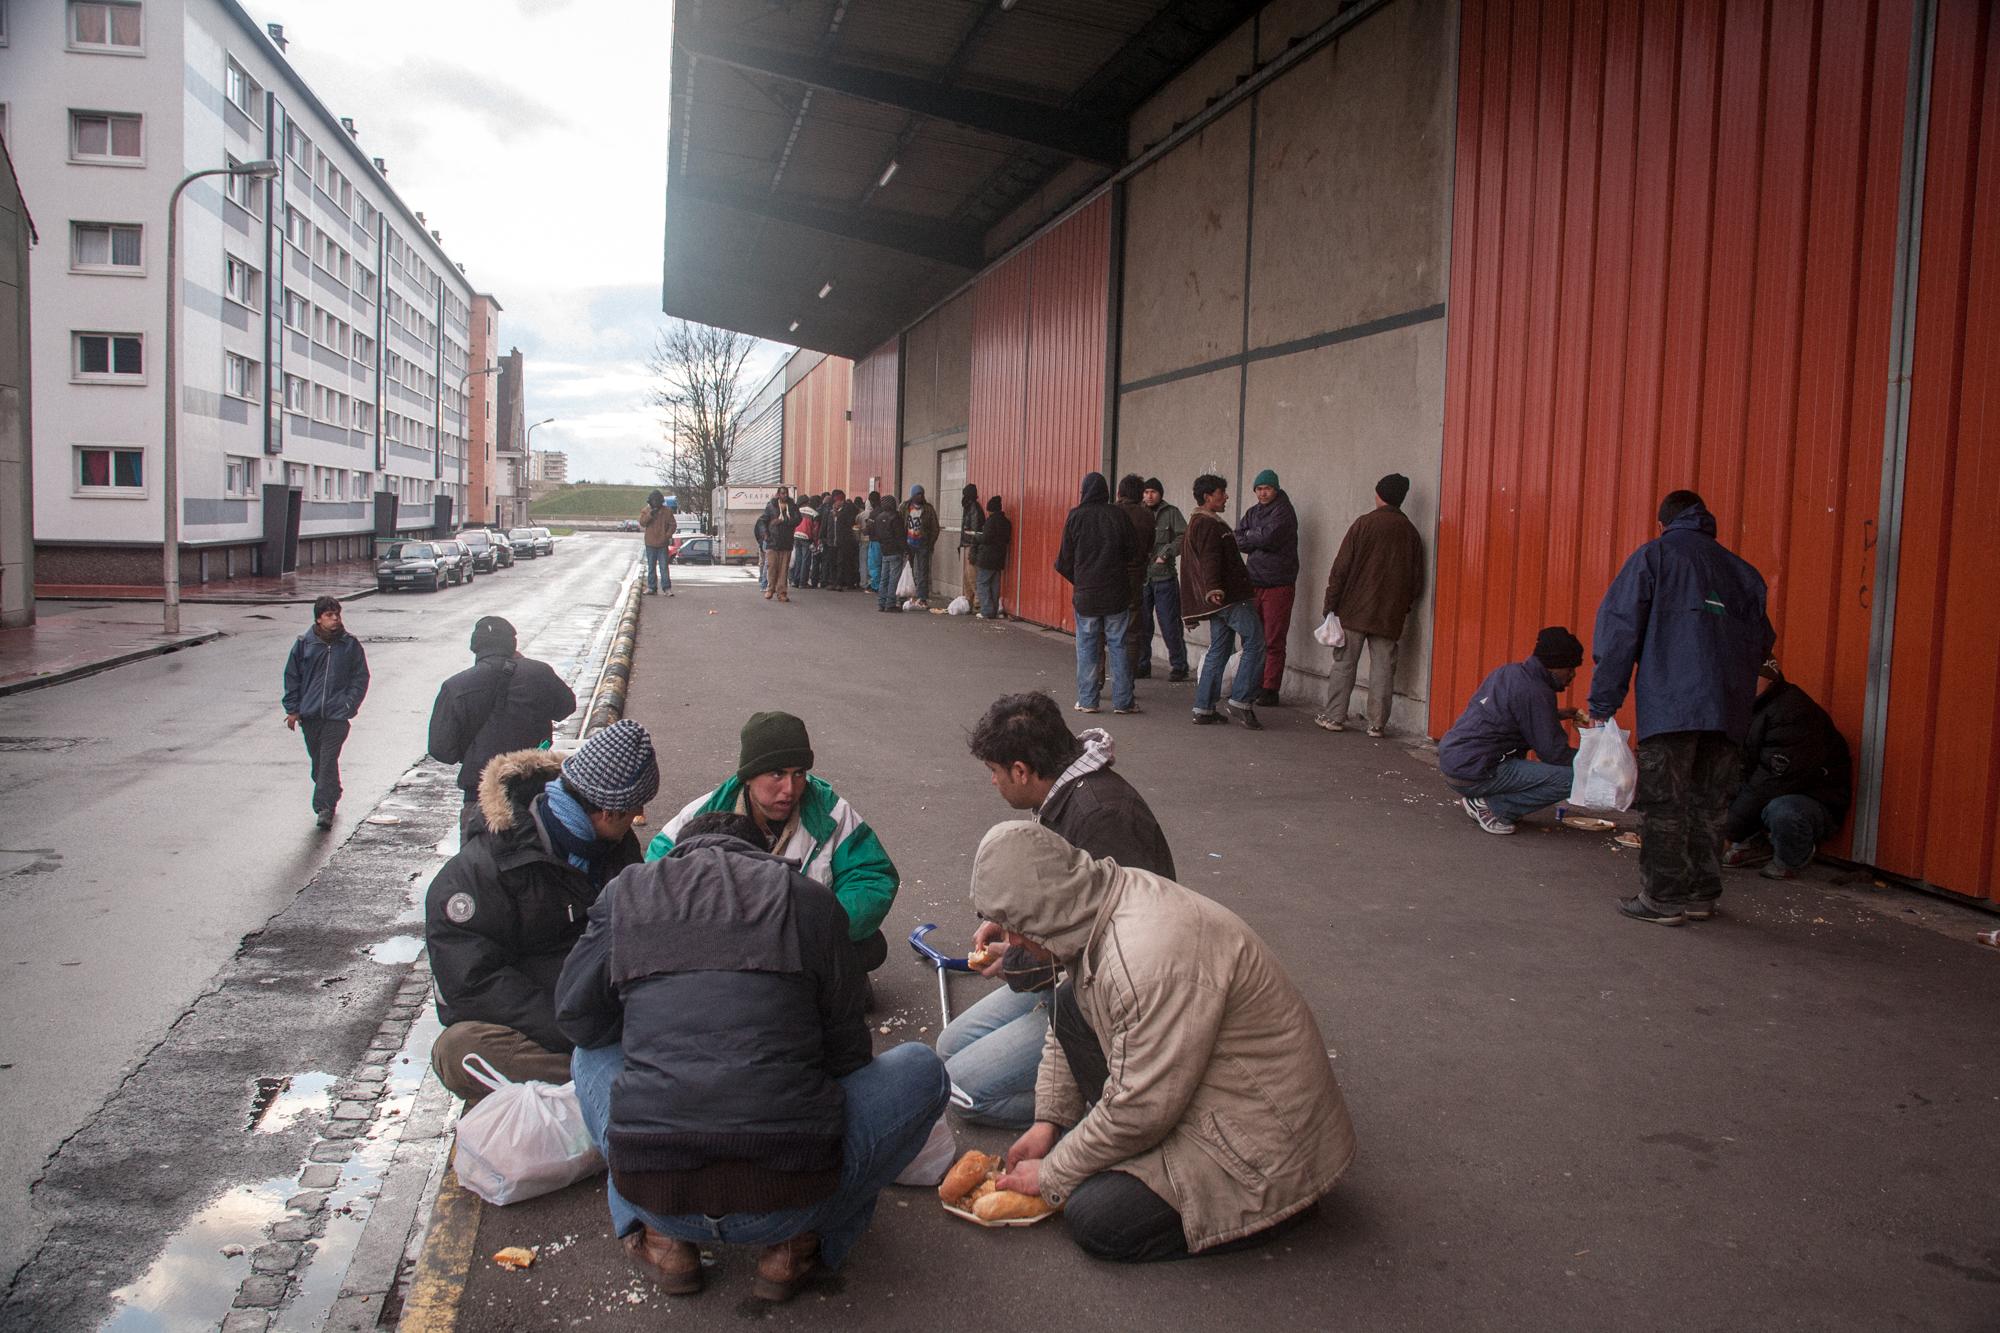 Migrants in Calais, France (2008)